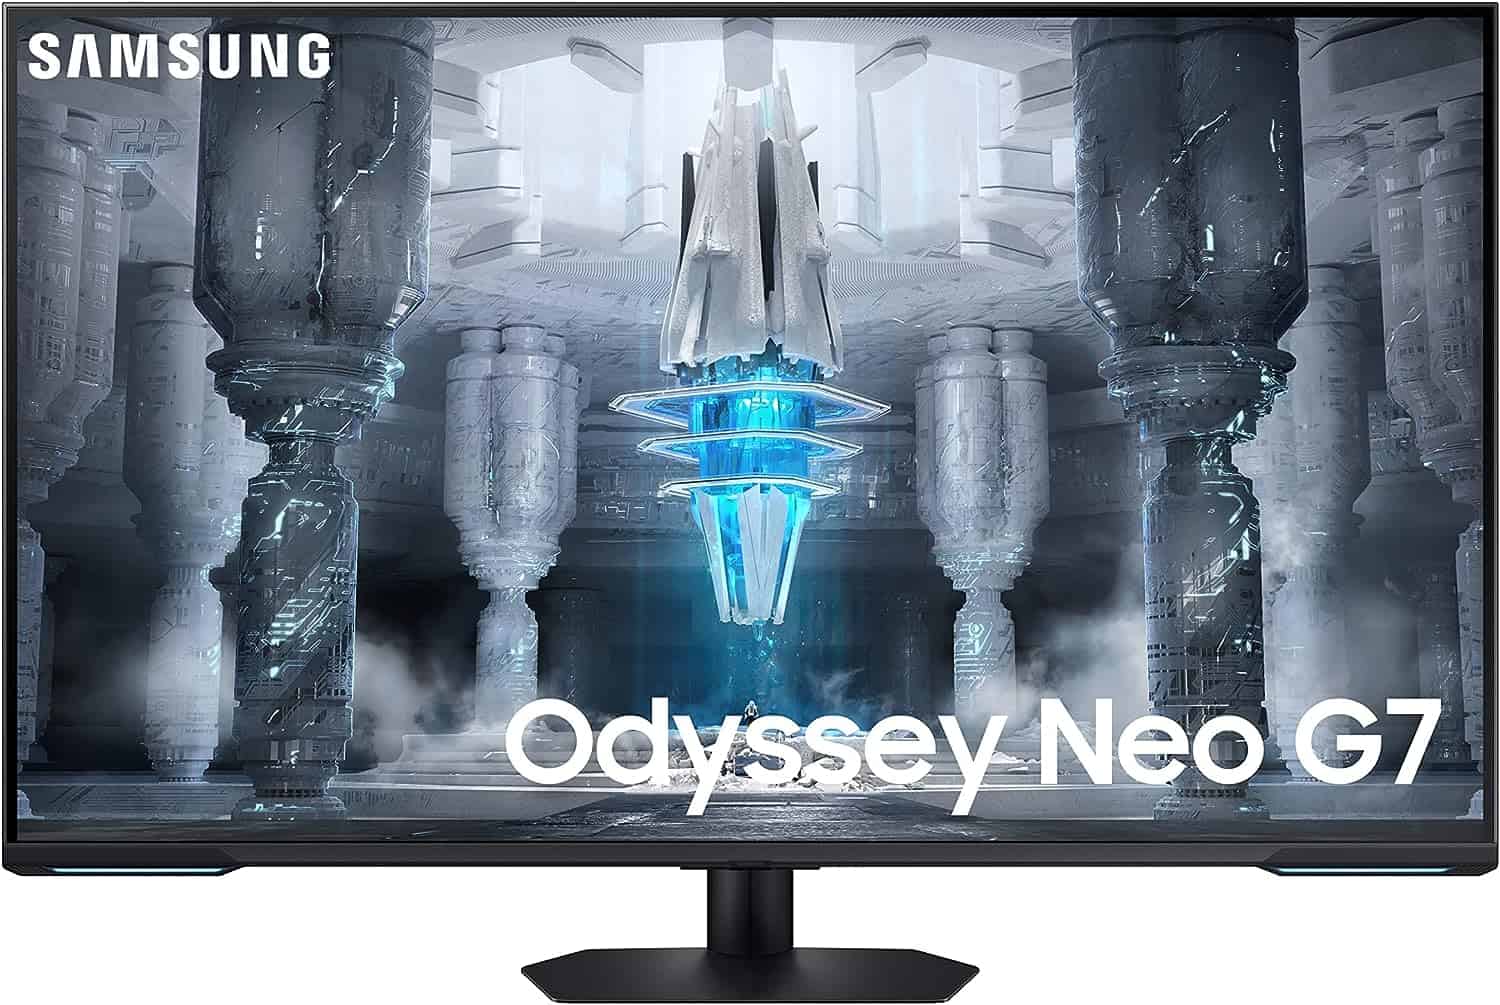 The New Samsung Odyssey Neo G9 Gaming Monitor Is $500 Off Ahead of  Christmas